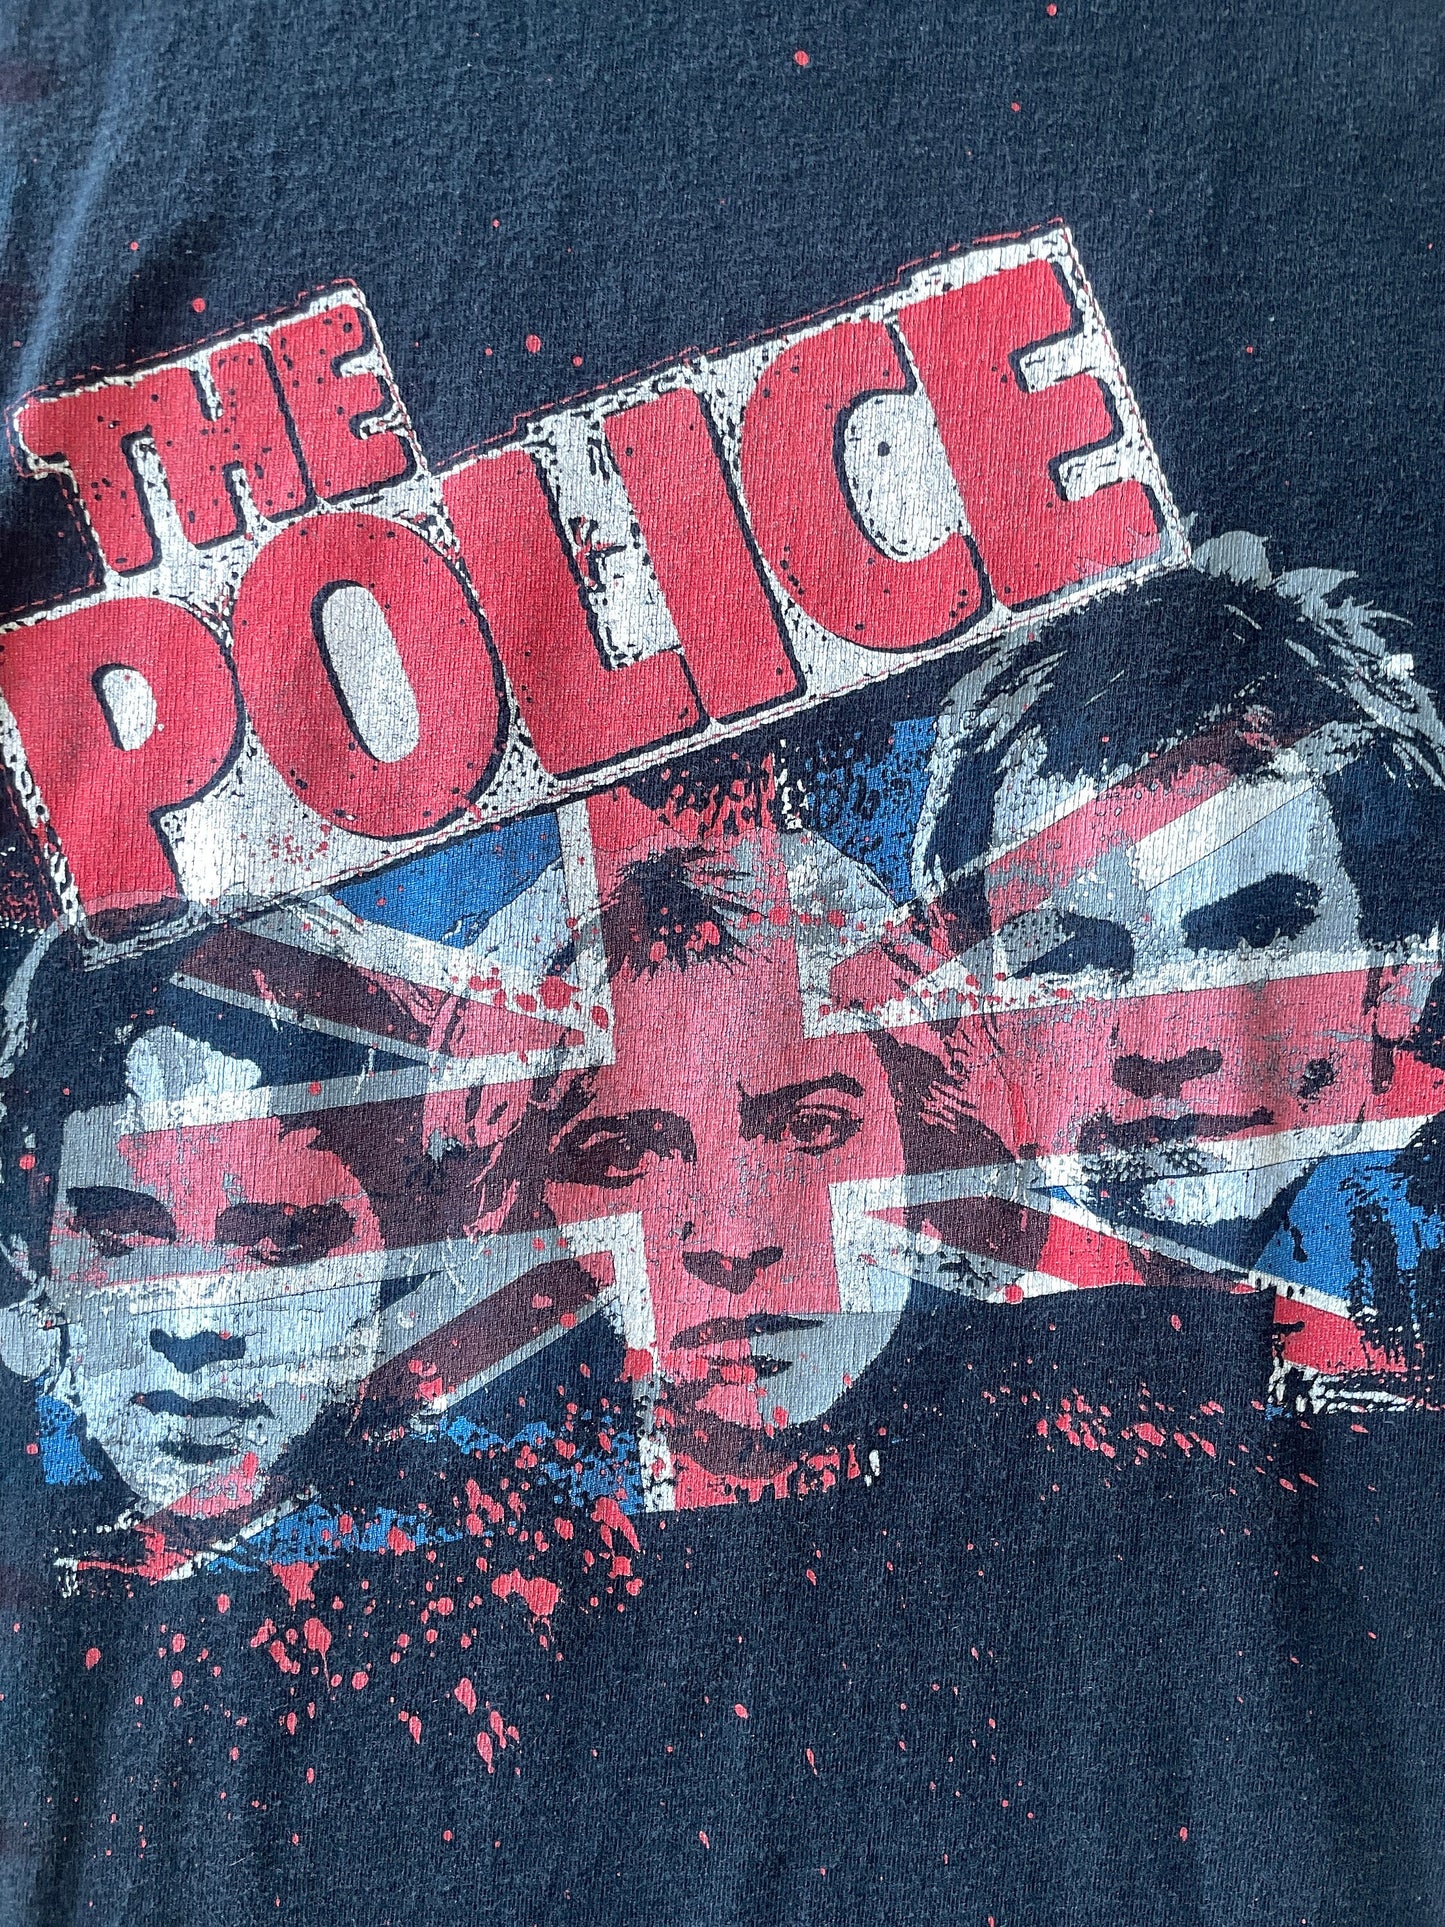 LARGE Men’s The Police 2007-08 World Tour Handmade Reverse Tie Dye Short Sleeve T-Shirt | One-Of-a-Kind Upcycled Black and Red Pleated Top